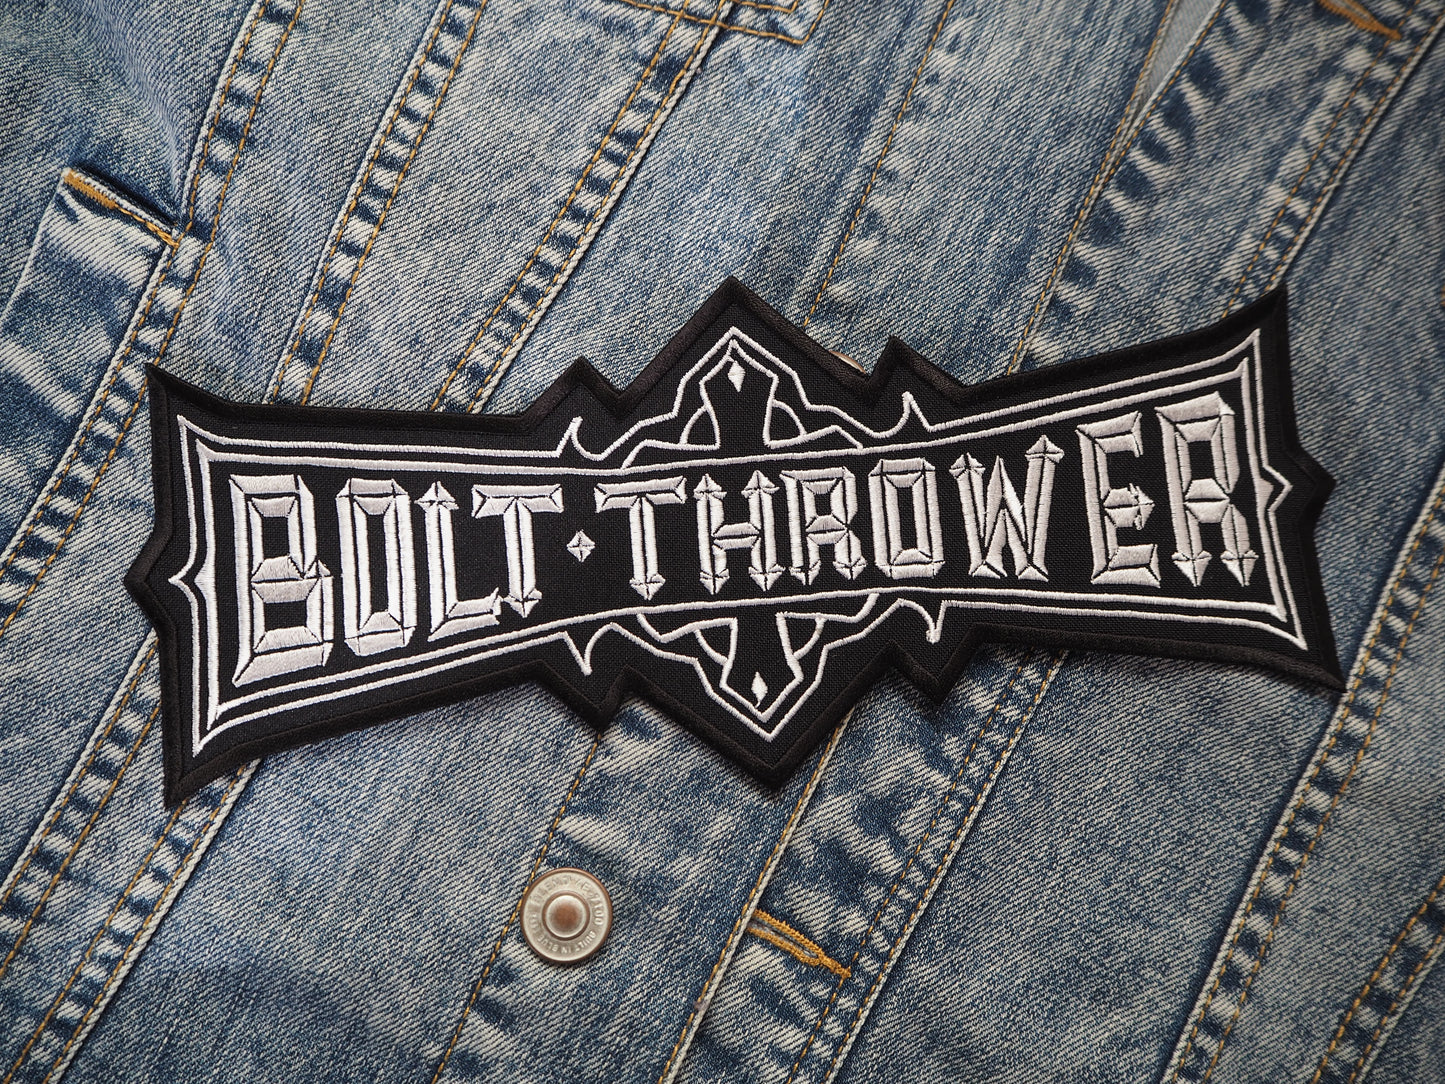 Death Metal band Patch